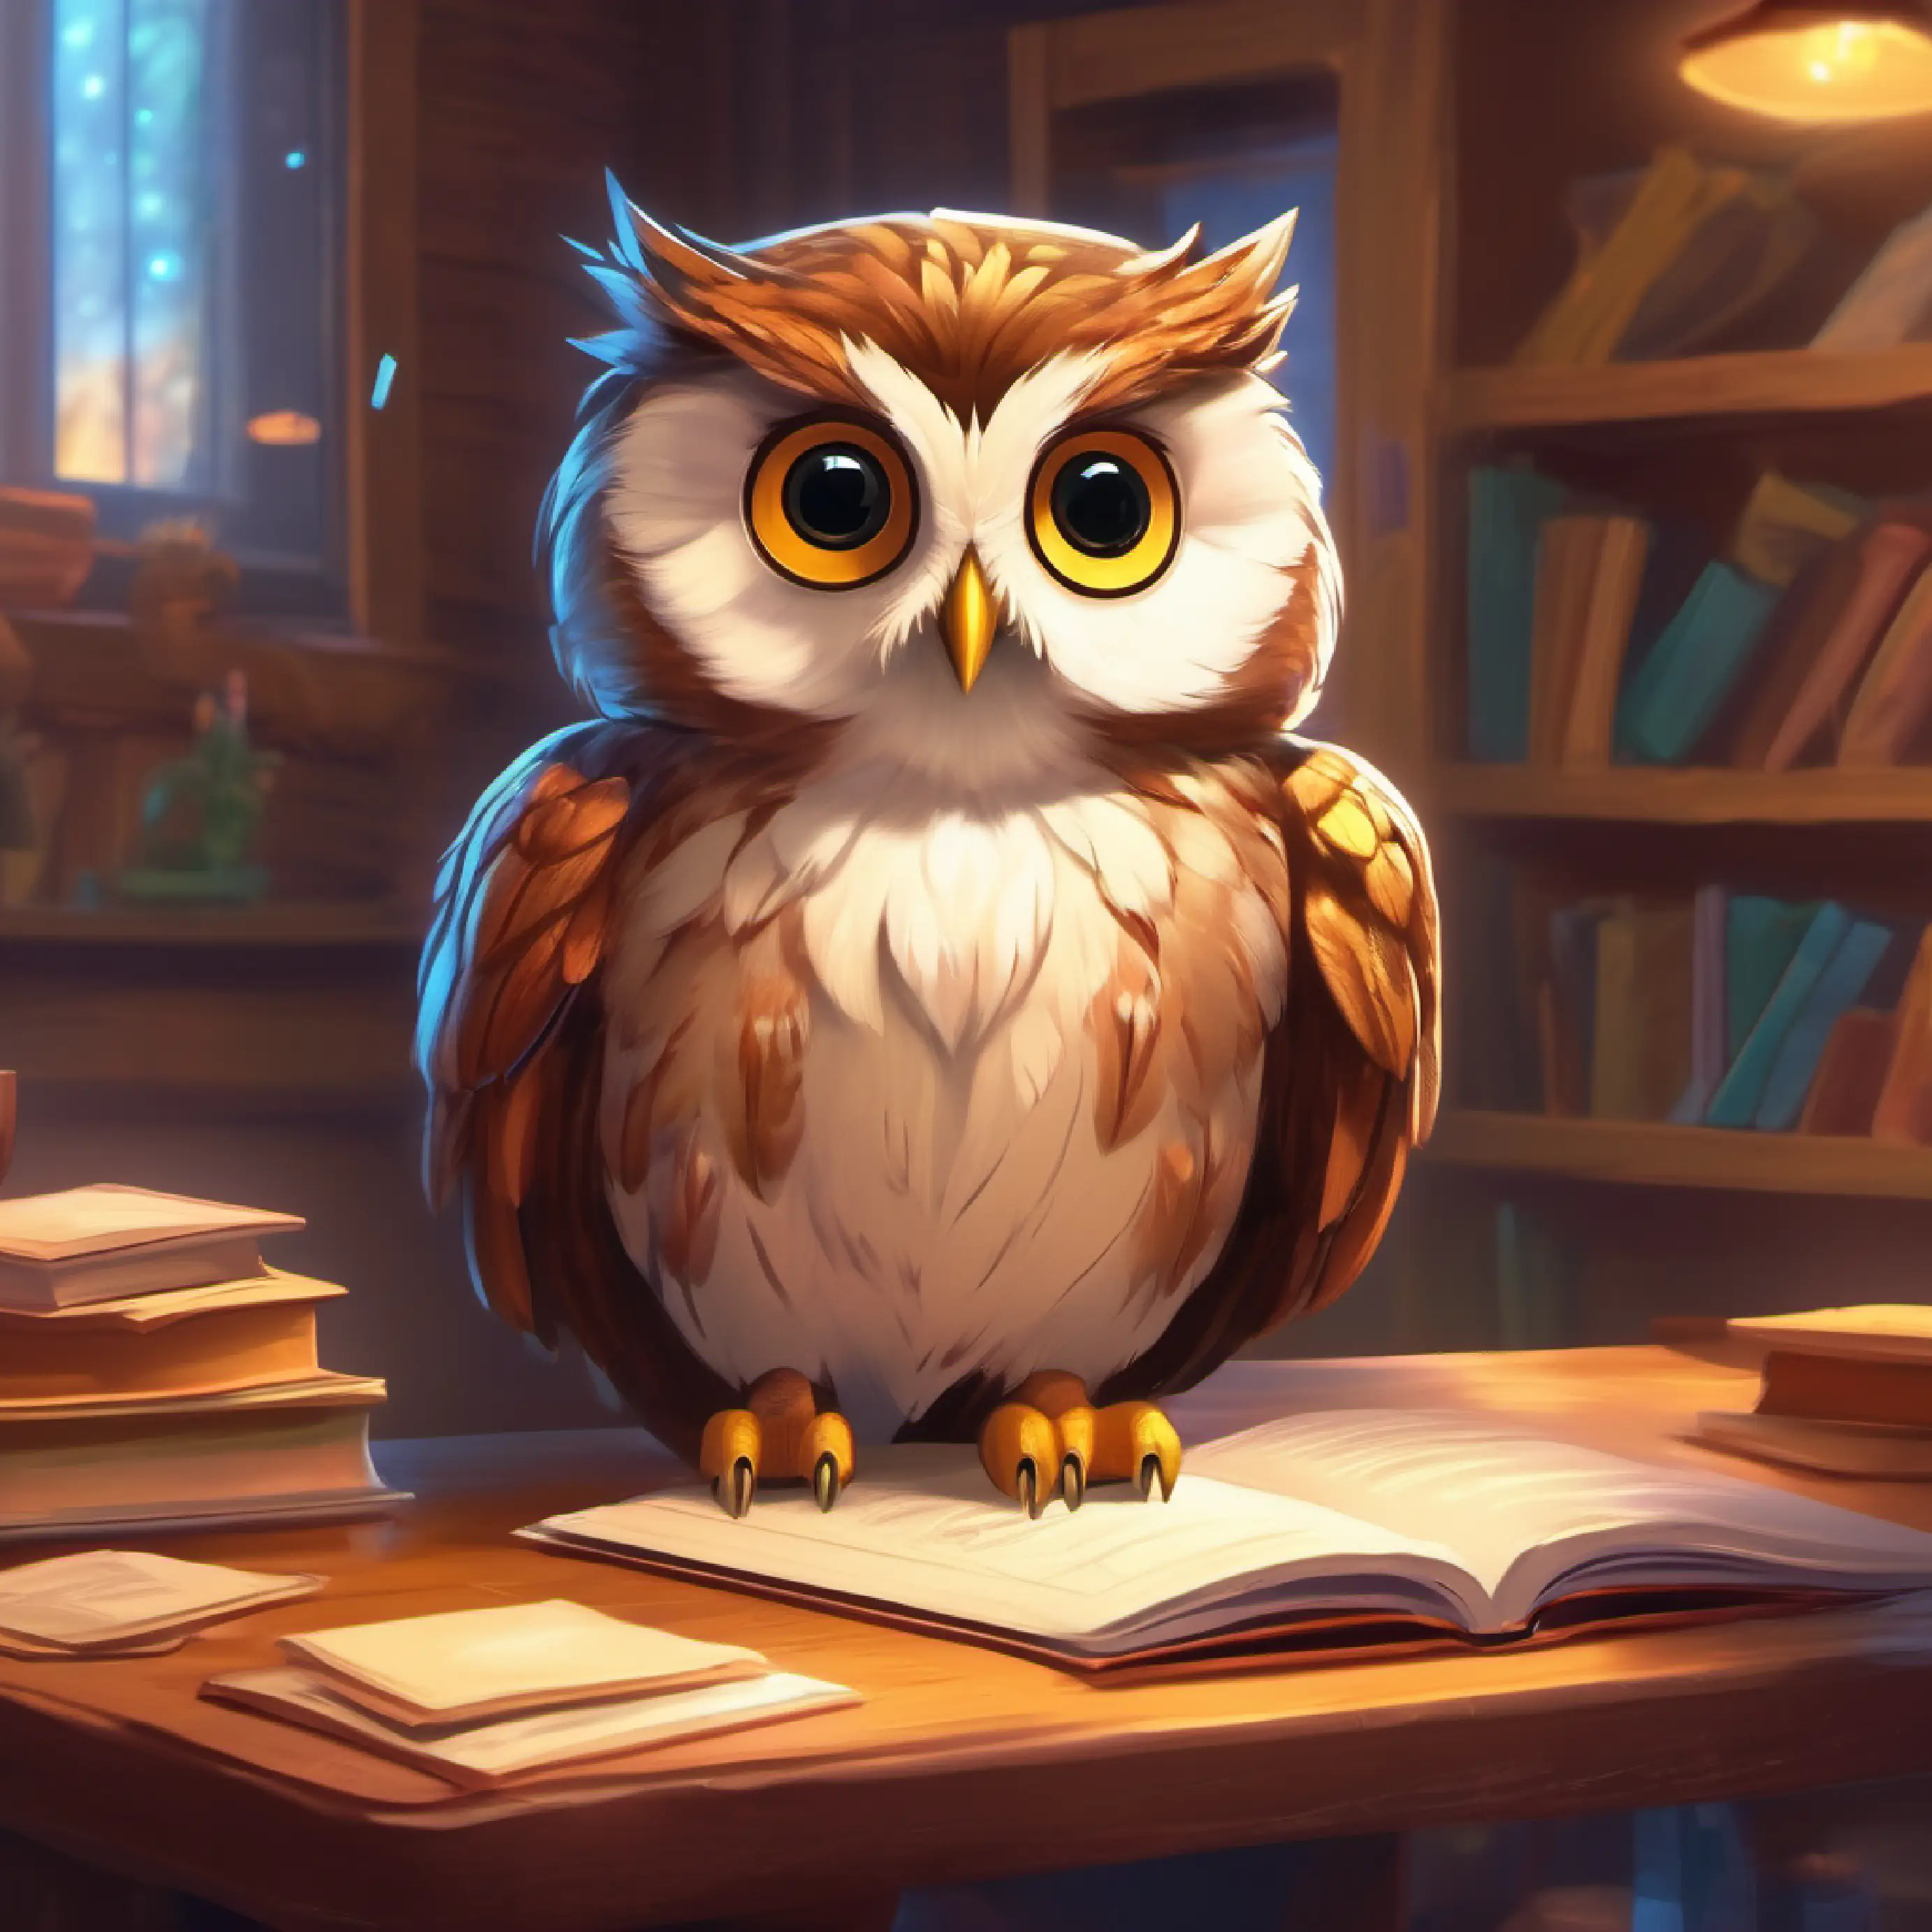 Wise owl teacher with soft feathers, sparkling eyes discussing the activities to expect.